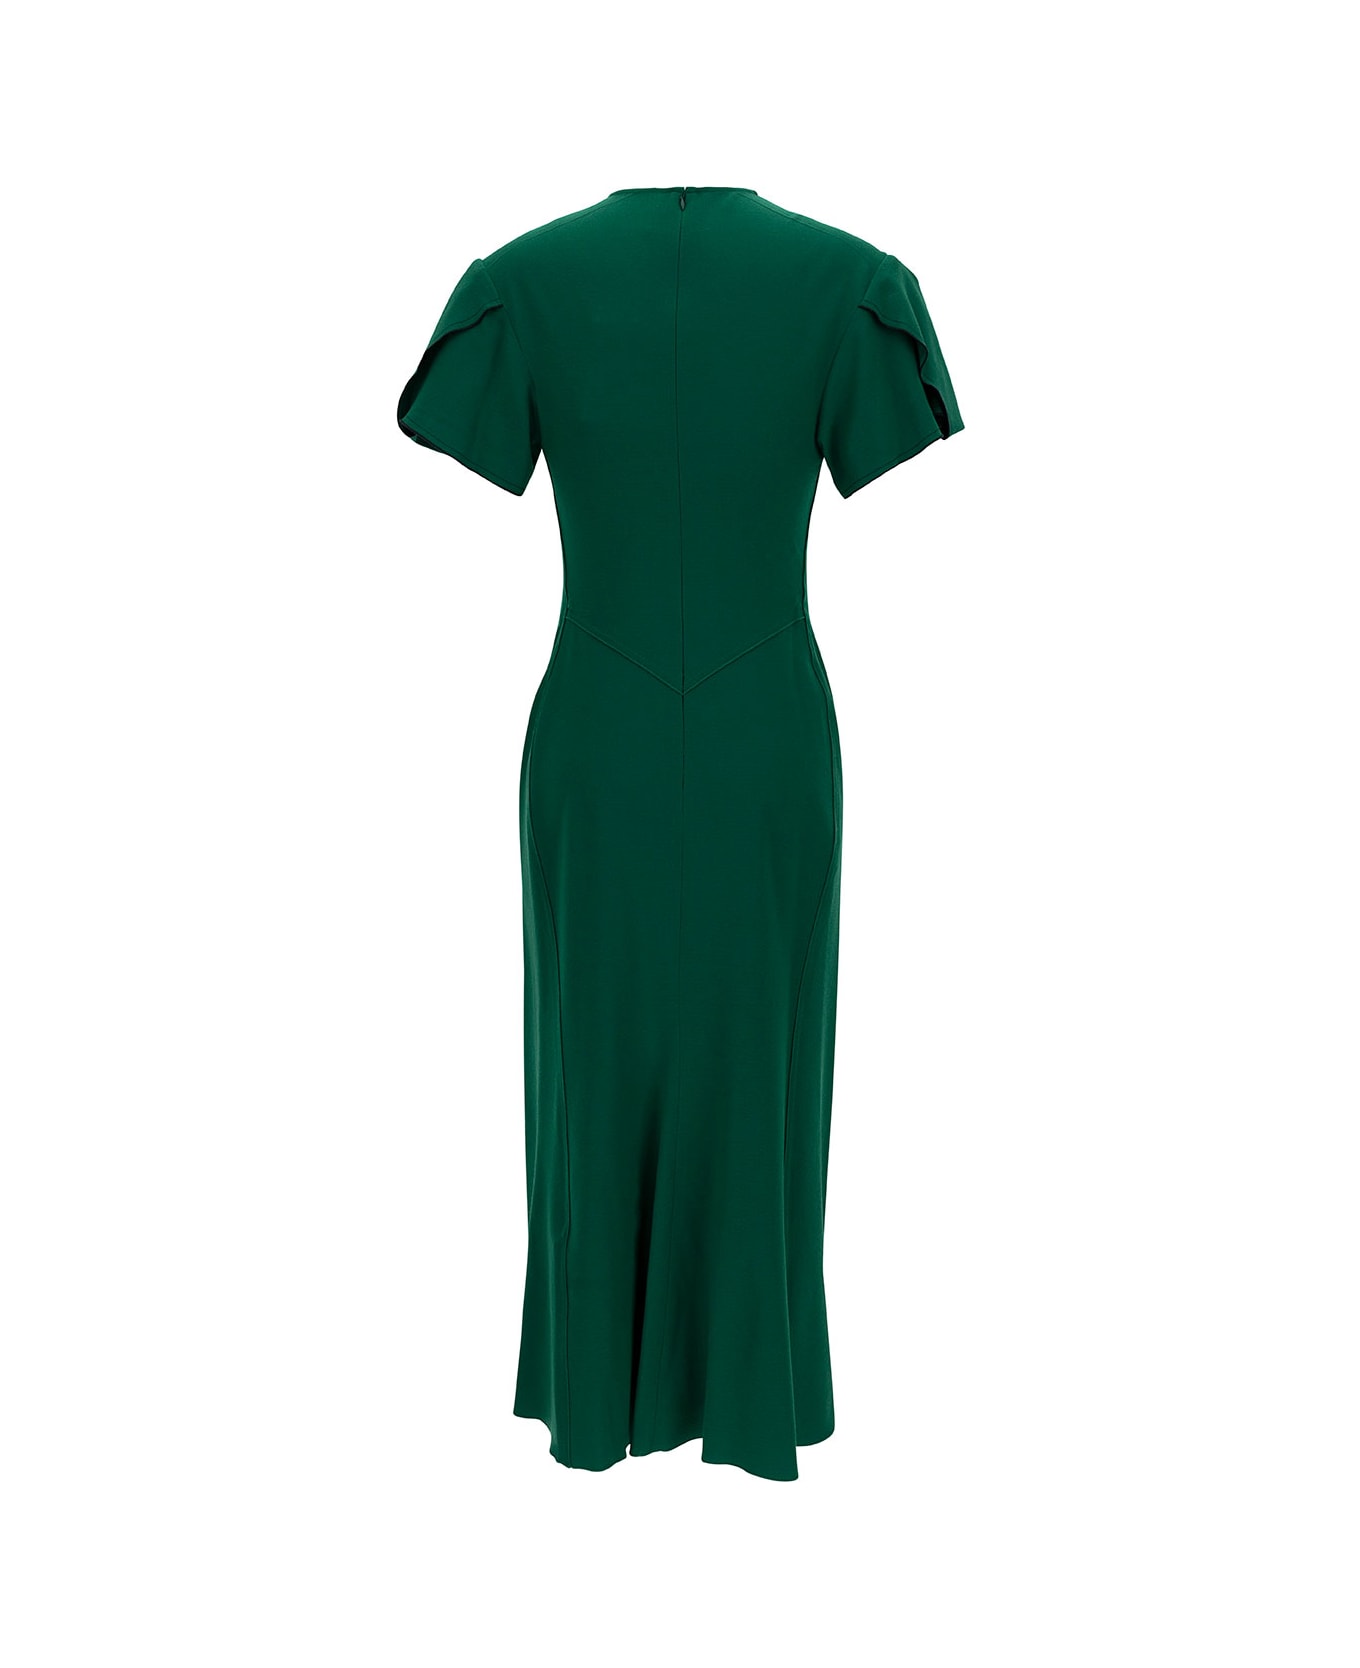 Victoria Beckham Midi Green Dress With Gatherings In Wool Blend Woman - Green